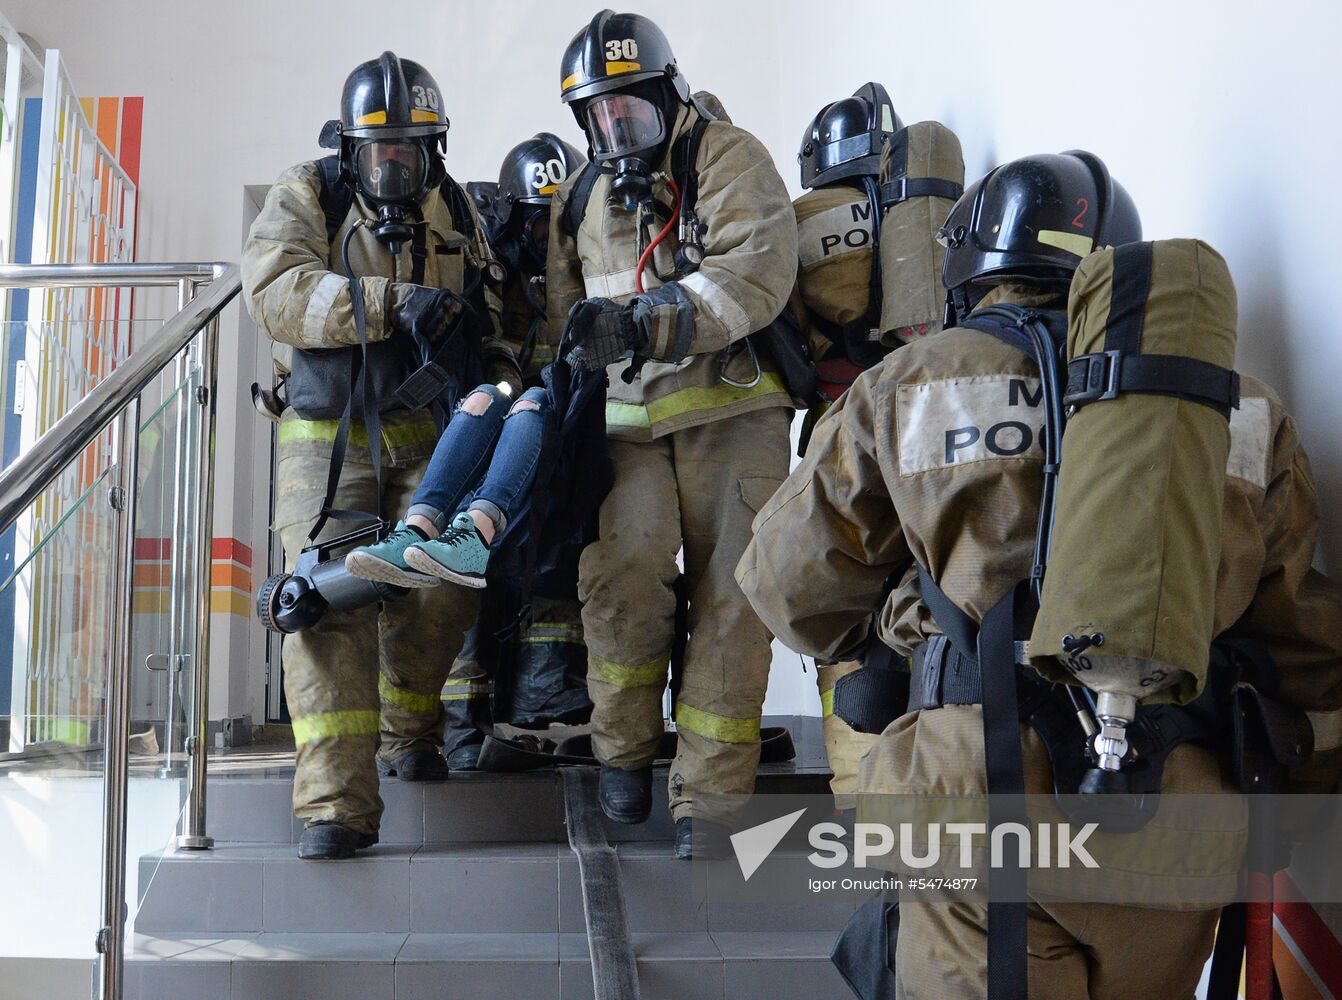 Evacuation tactics and simulated firefighting drill in Yuzhny Park shopping mall in Khabarovsk